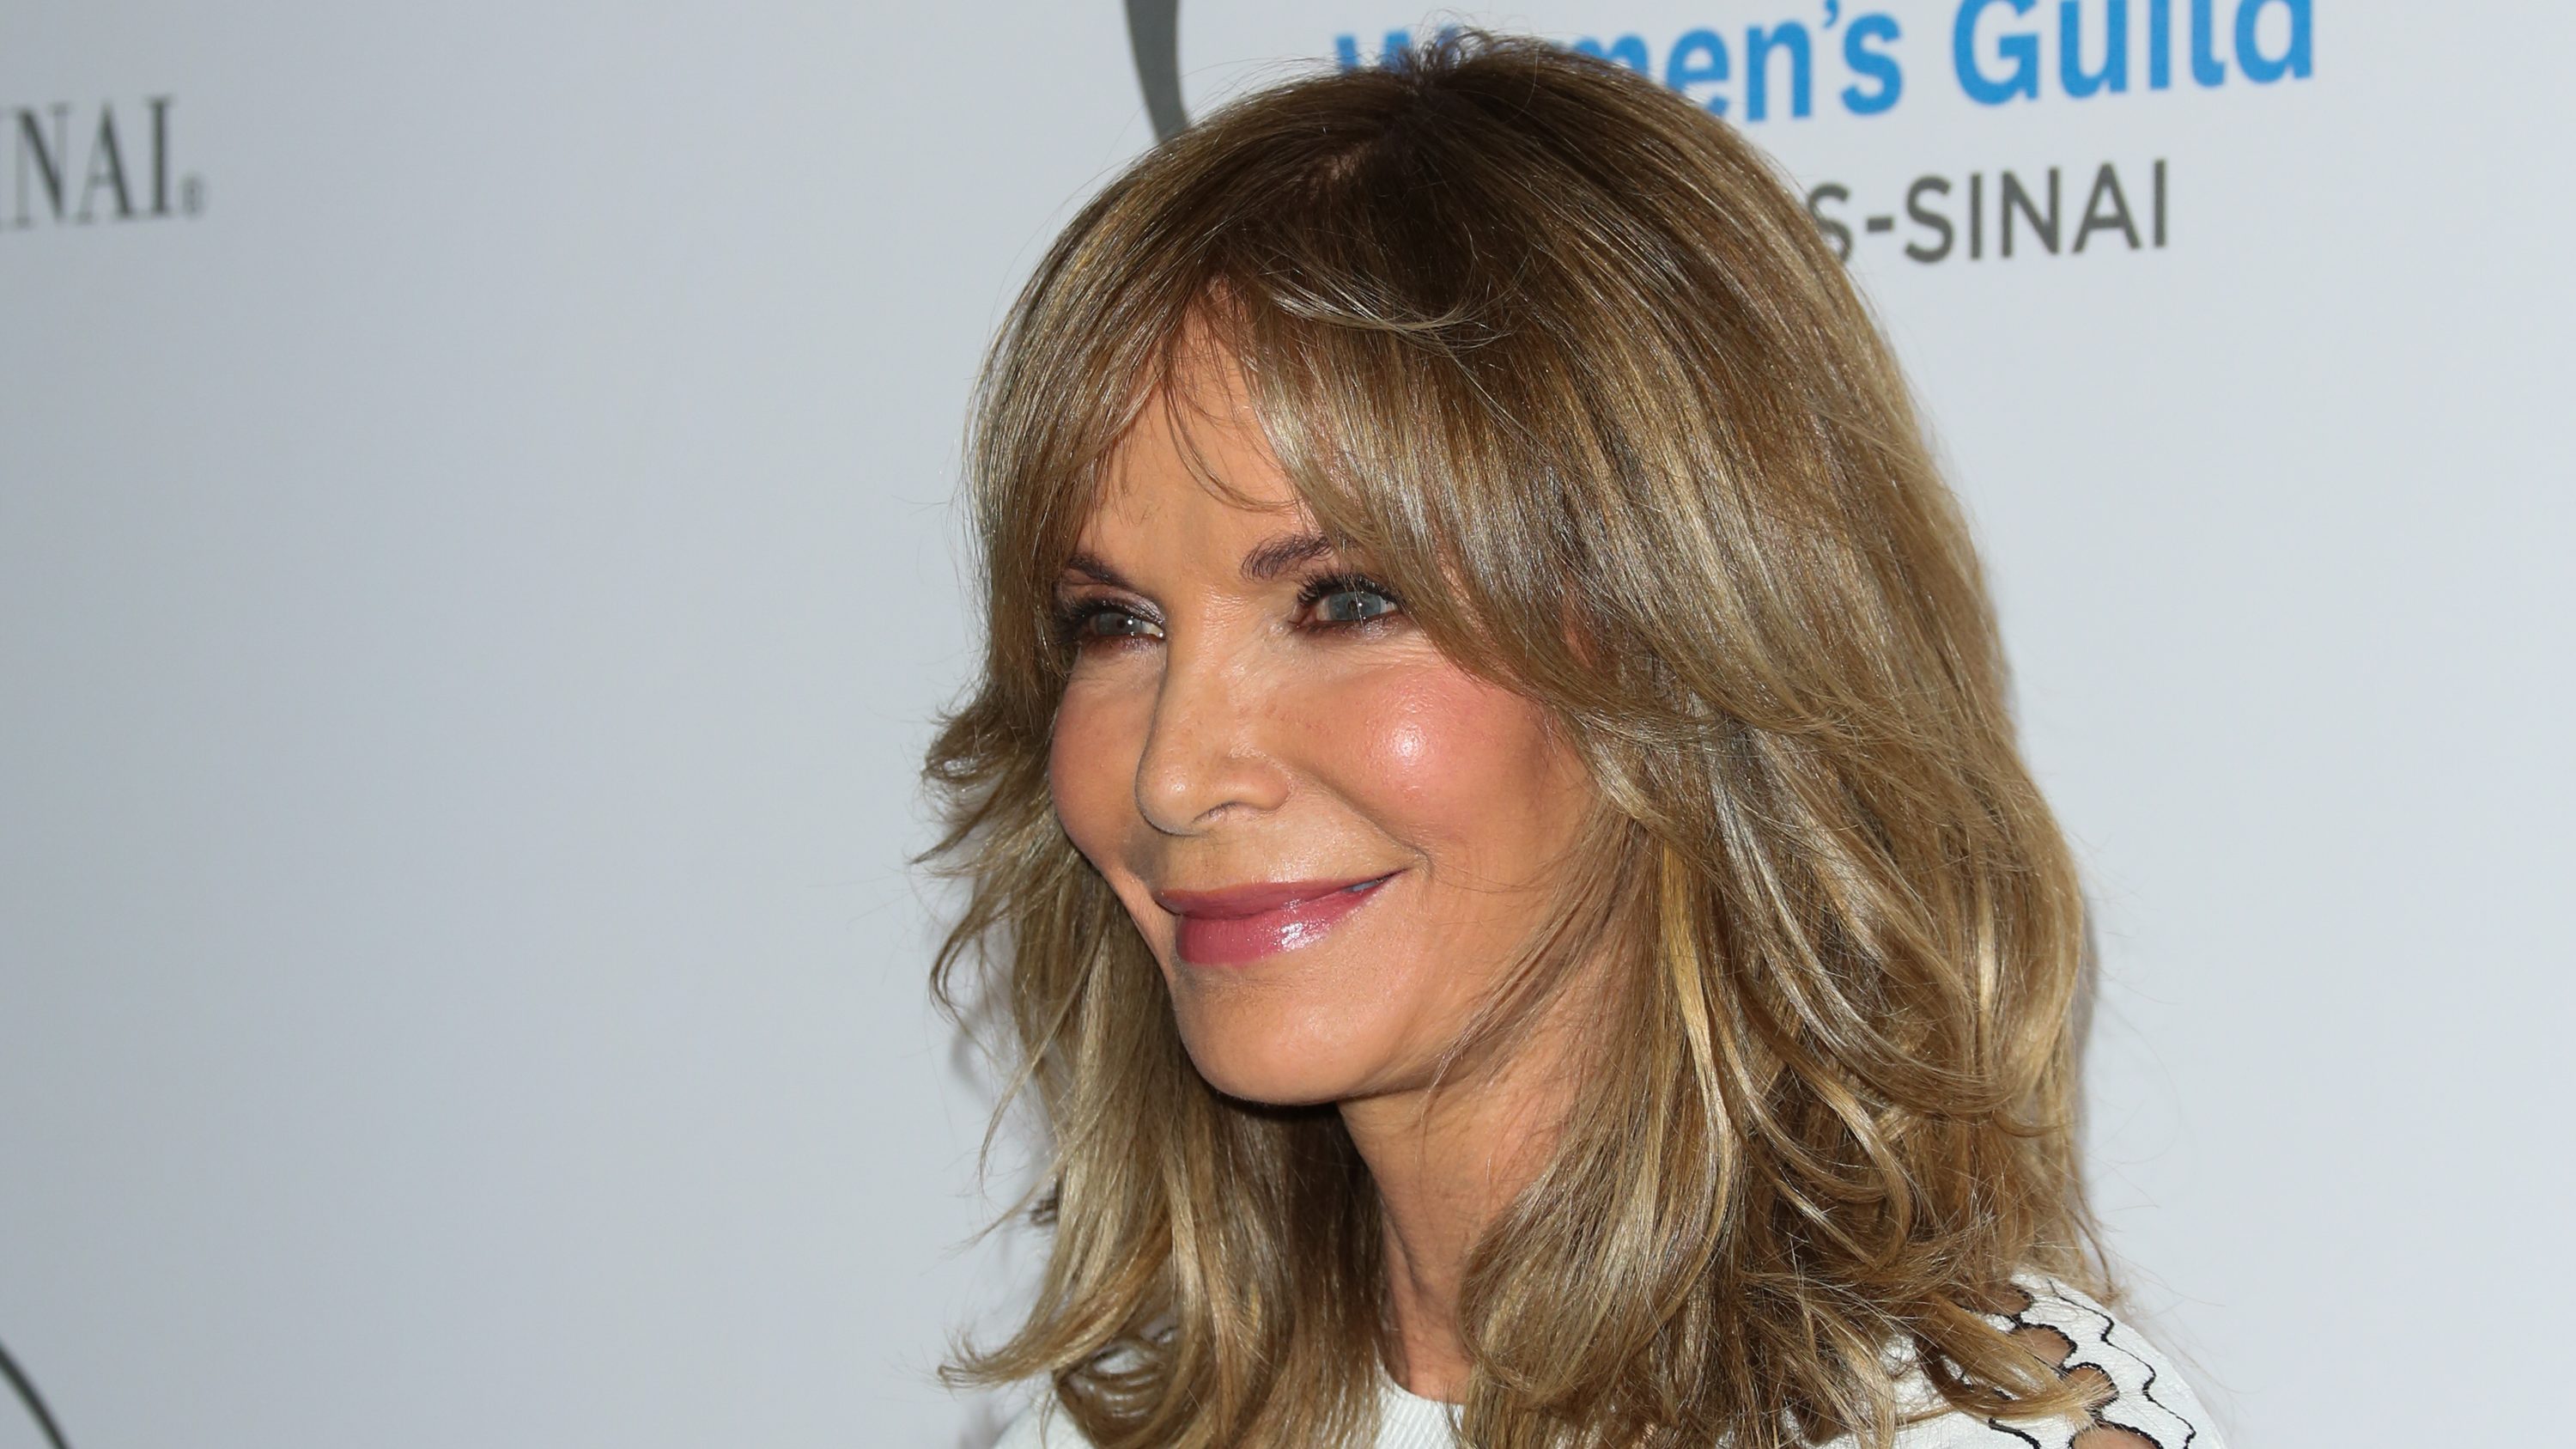 Jaclyn smith picture 2020